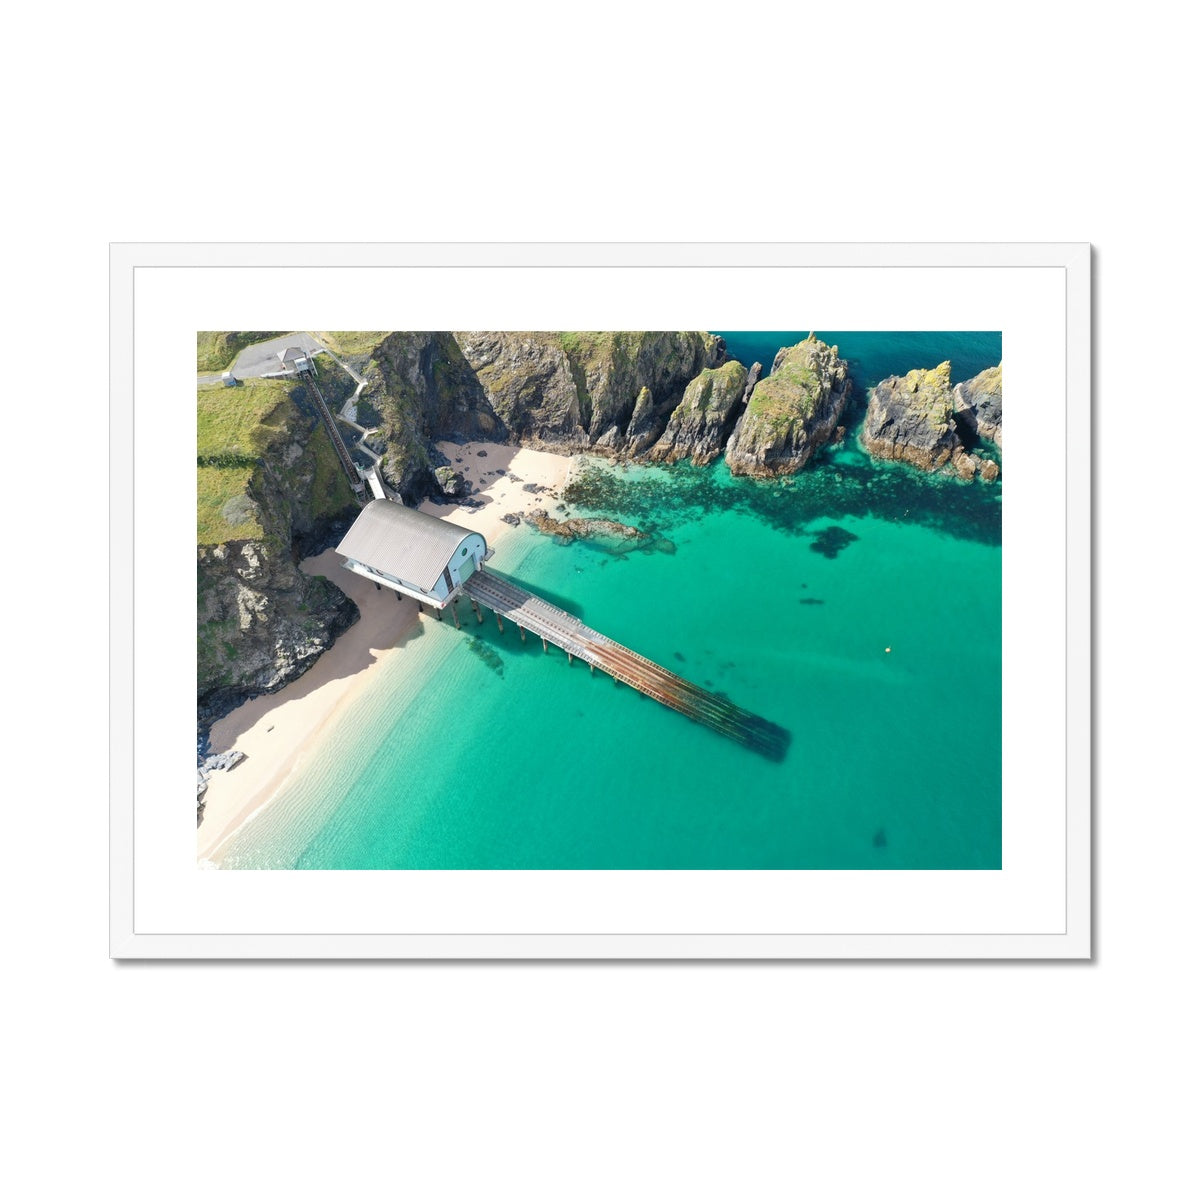 padstow lifeboat station white frame